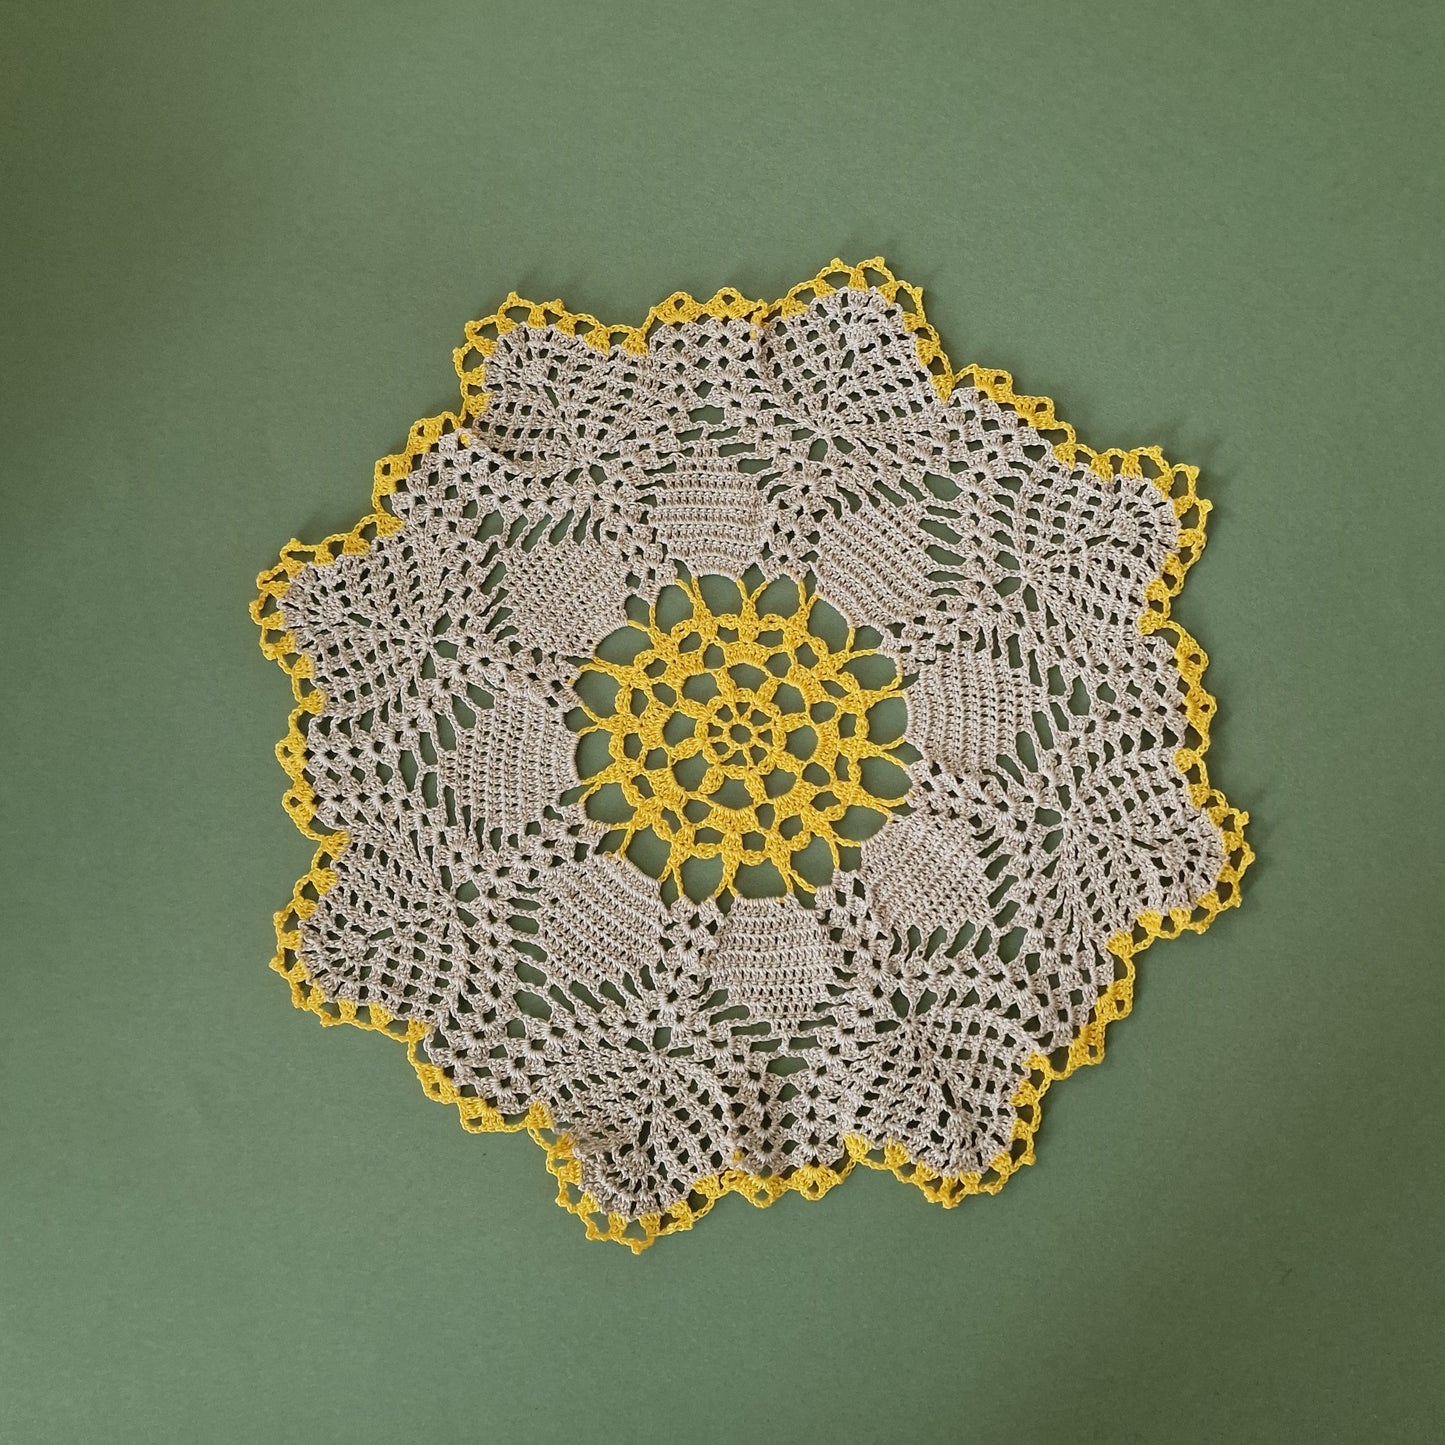 Crocheted round tablecloth light brown / yellow (LIĒR 23)